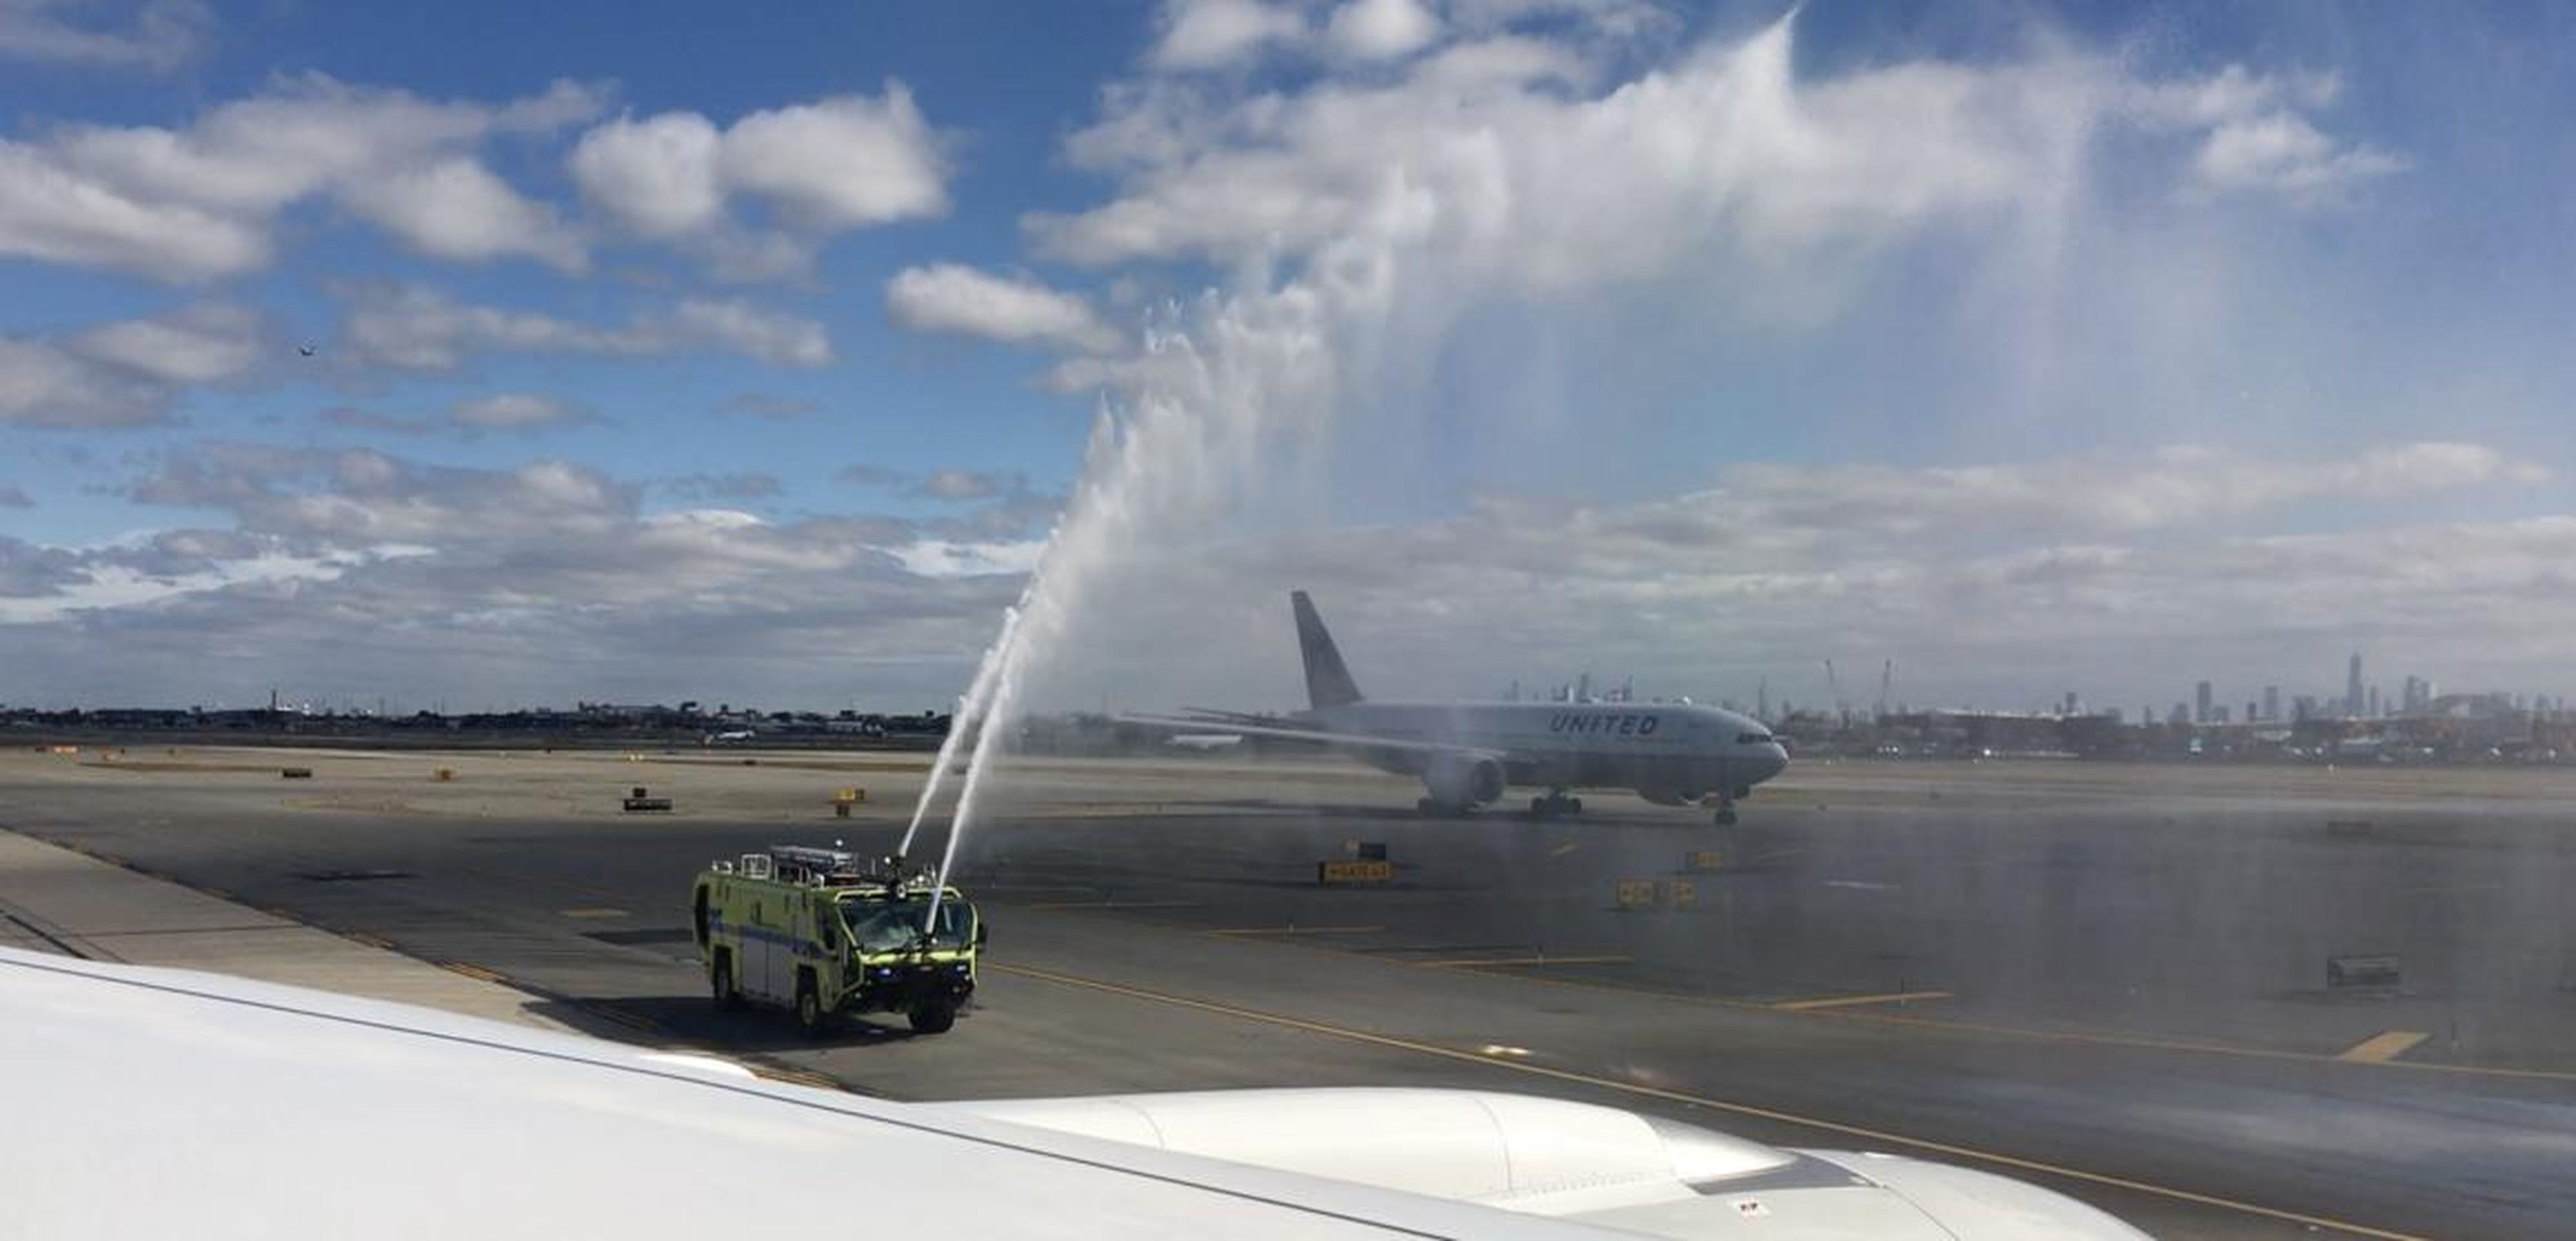 Next, fire trucks commemorated the special occasion with a water-cannon salute.